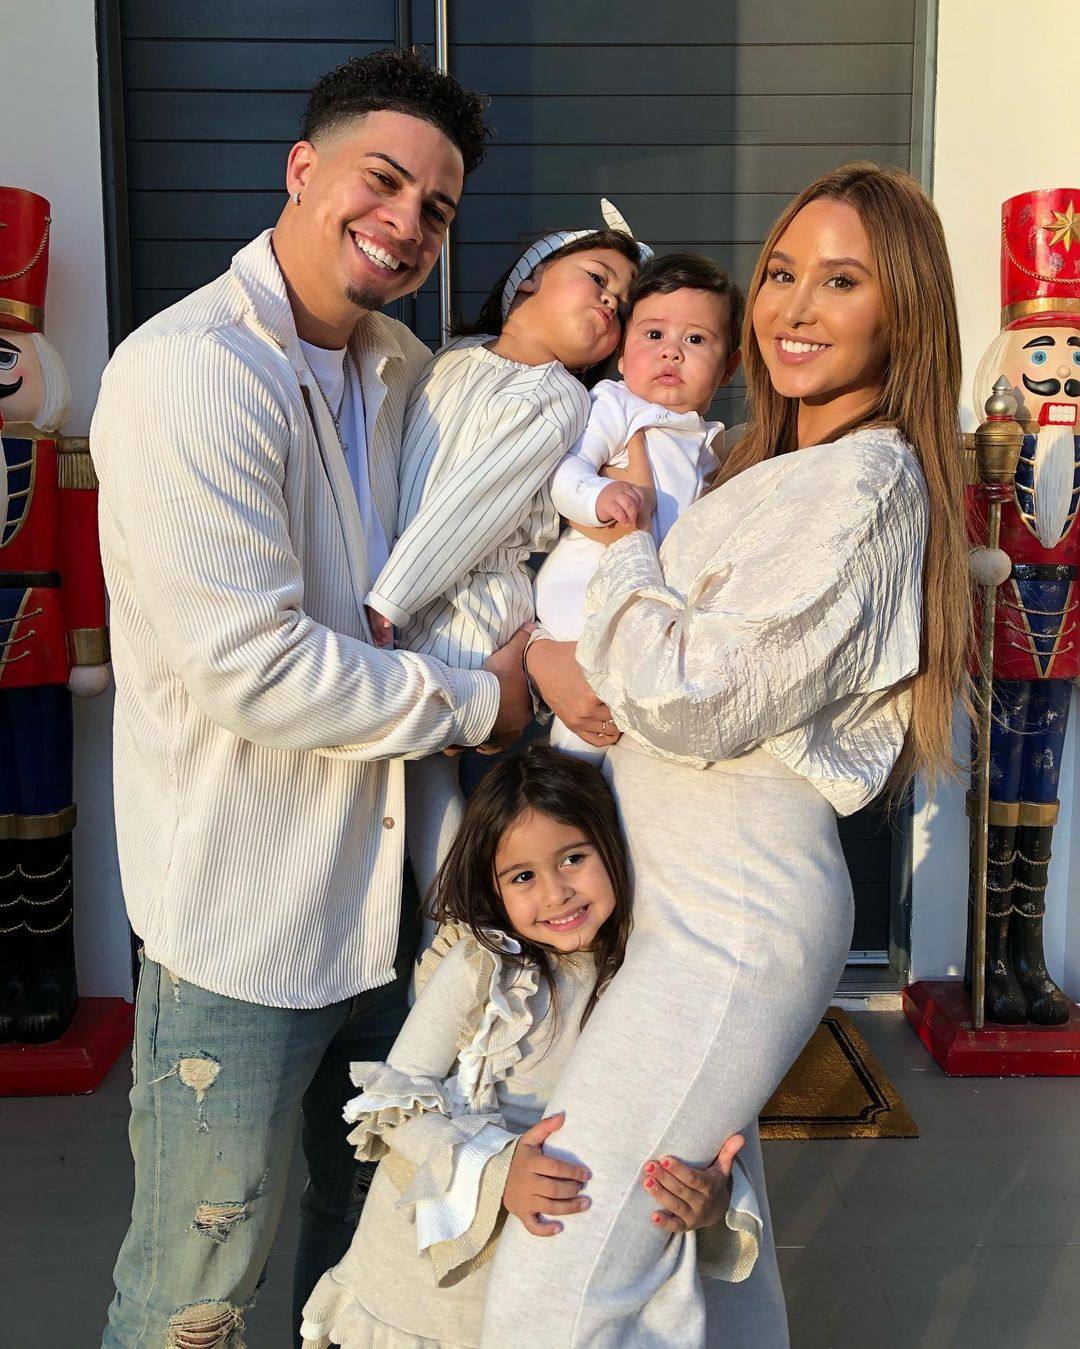 Catherine and Austin McBroom, the parent vloggers behind The Ace Family YouTube channel, devastated fans with news of their divorce in January. Photo: @theacefamily/Instagram